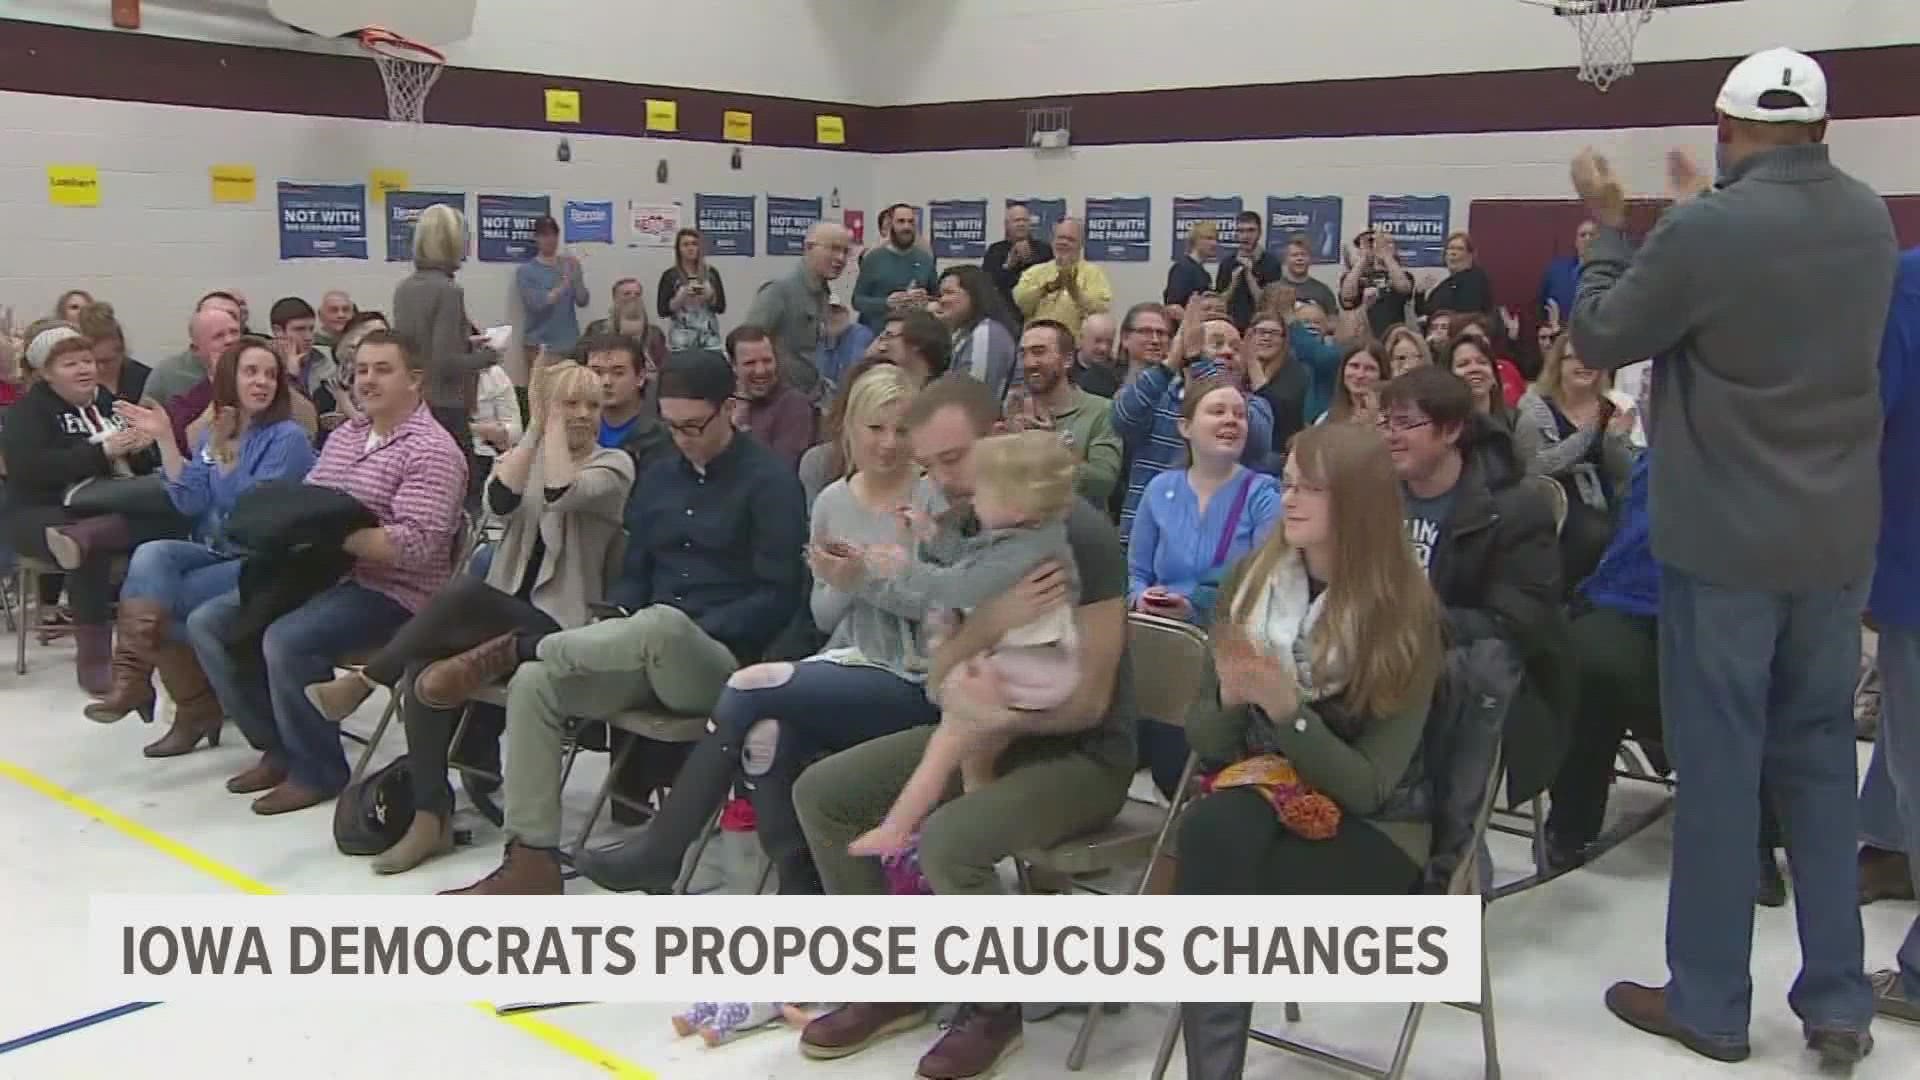 Iowa's Democrats said they listened to criticisms of the current caucus process and are proposing major improvements at the DNC to address them.